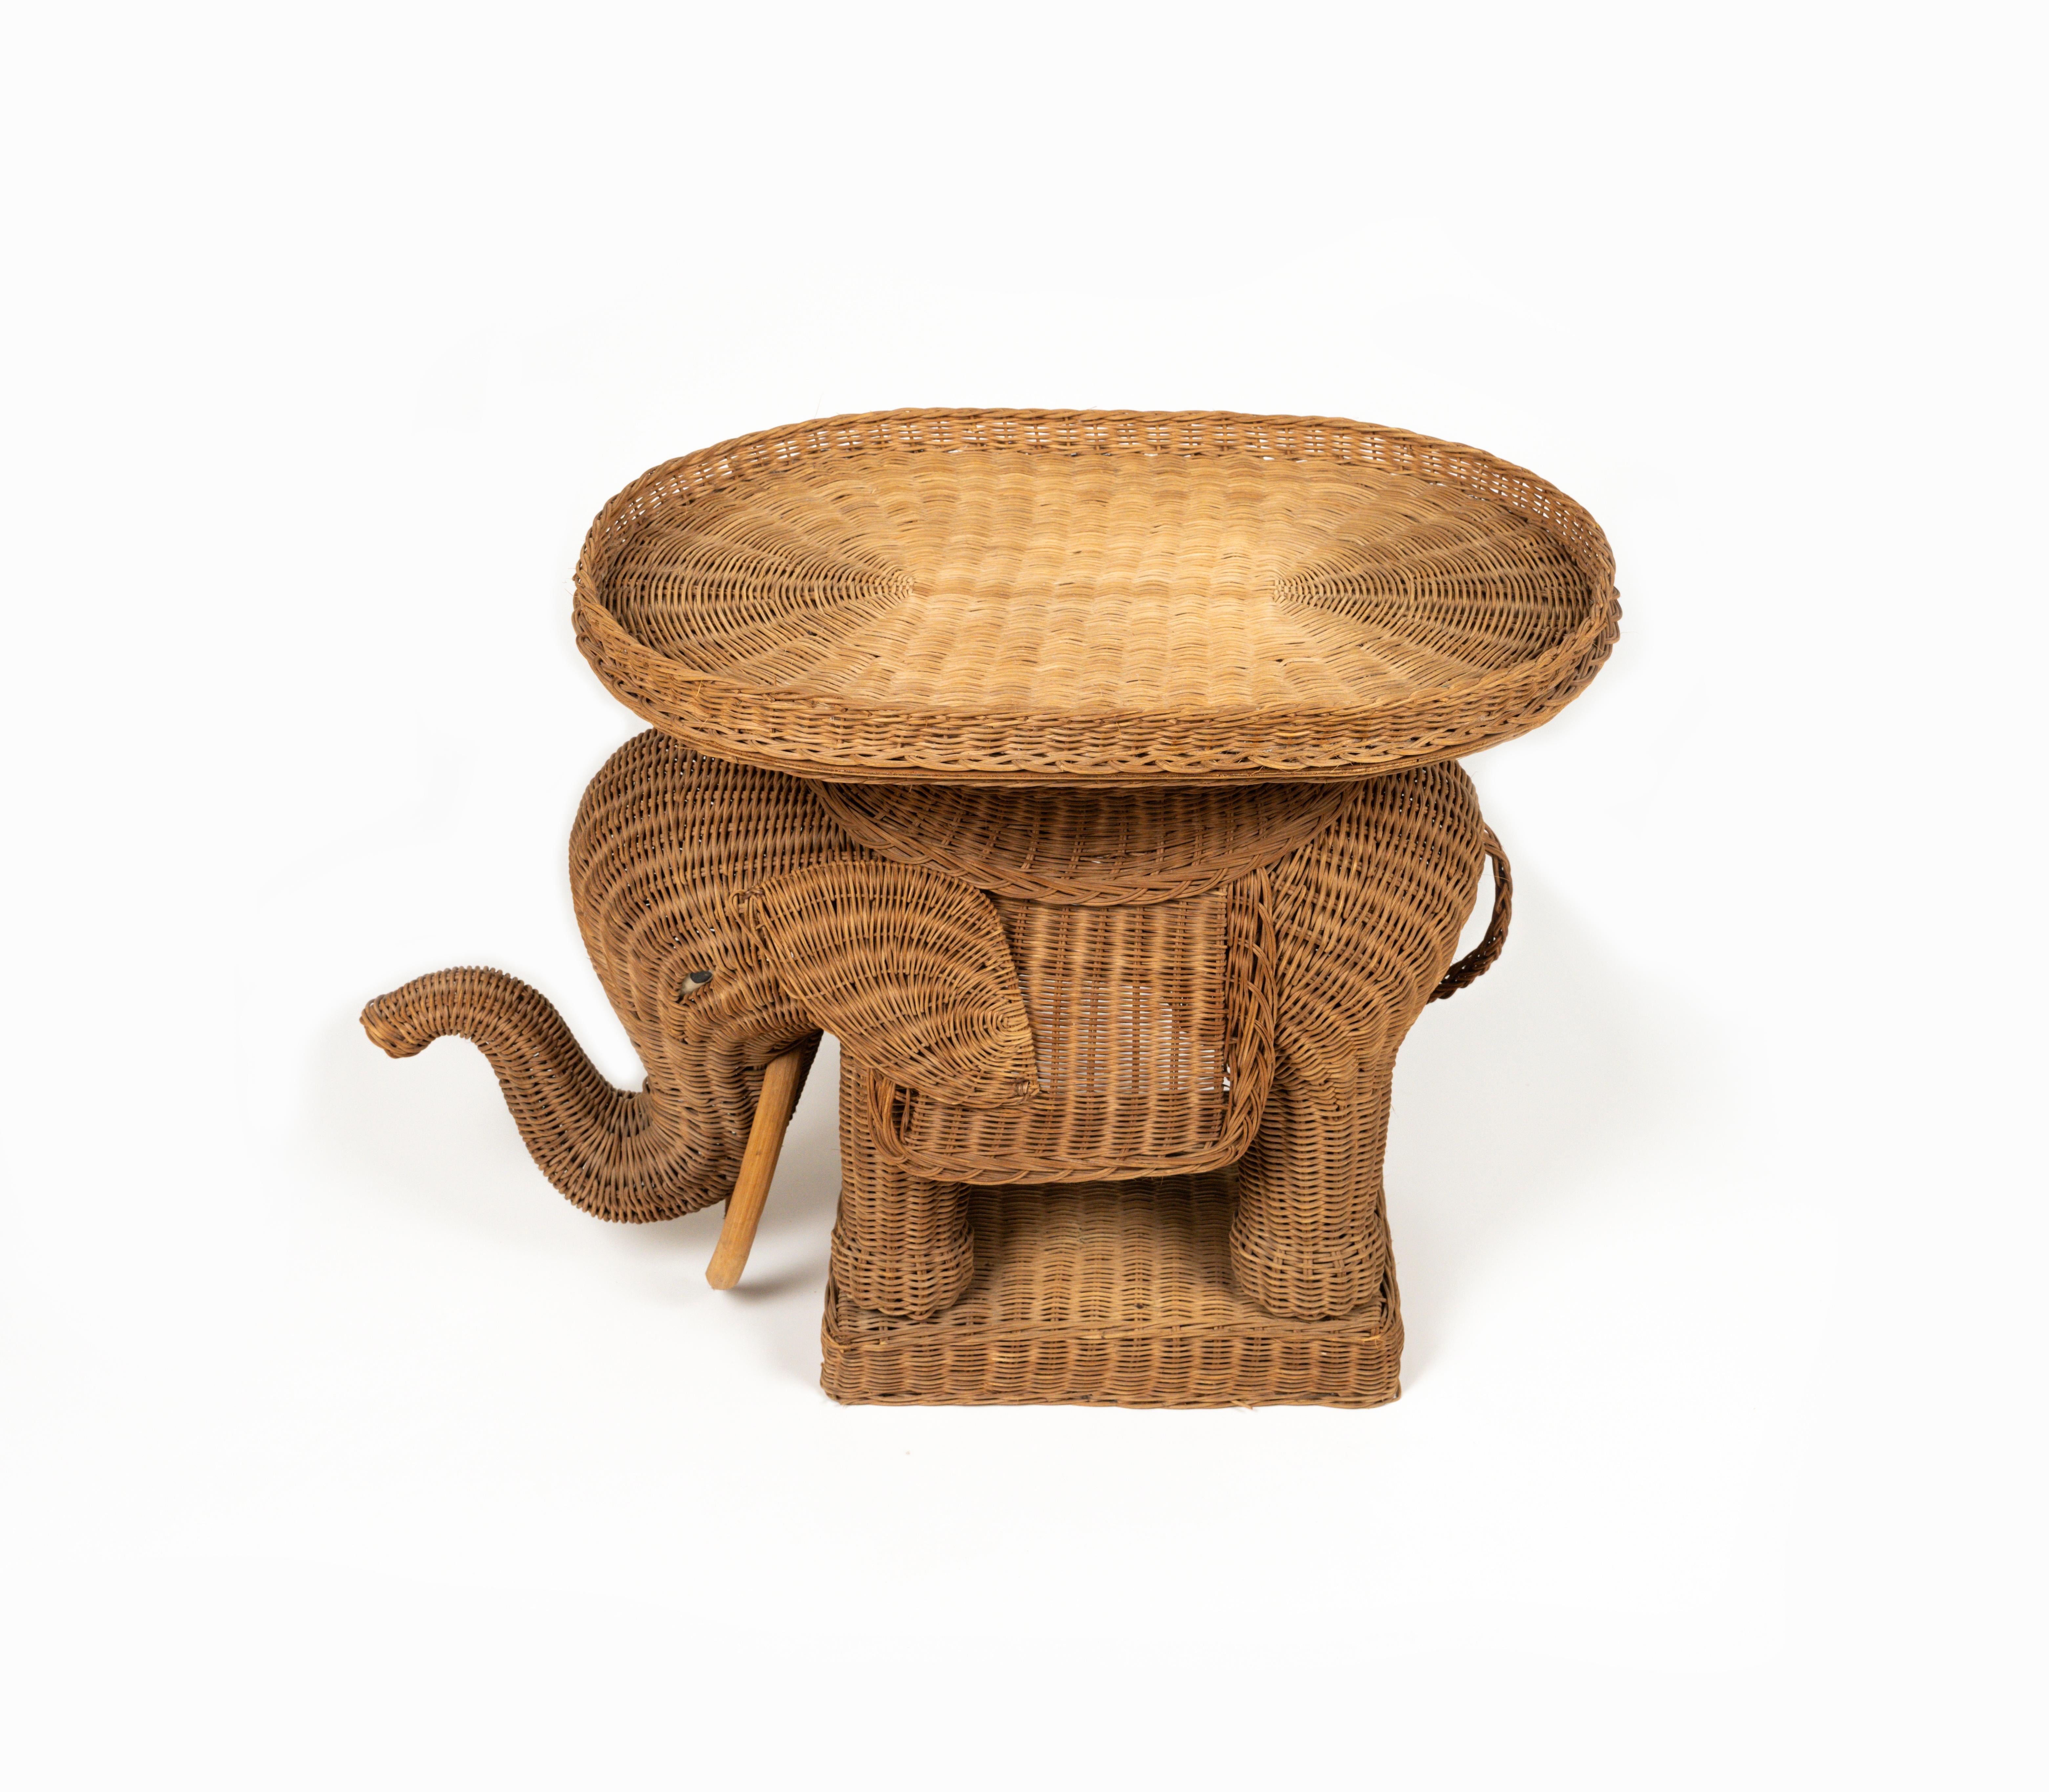 Rattan & Wicker Elephant Side Coffee Table Vivai Del Sud Style, Italy, 1960s For Sale 1